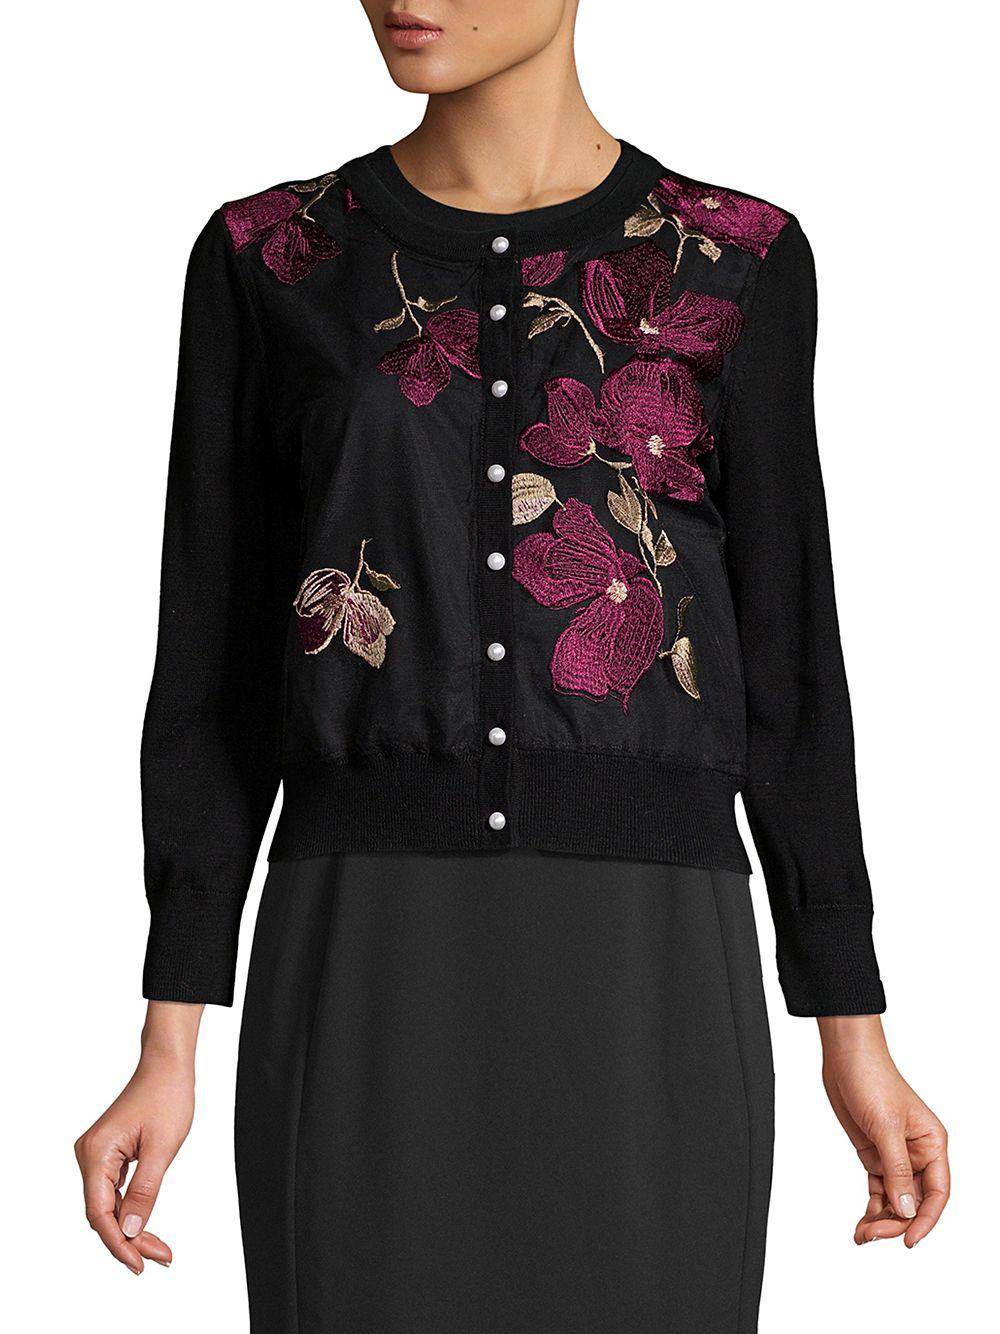 Karl Lagerfeld Embroidered Floral Cardigan in Black - Lyst